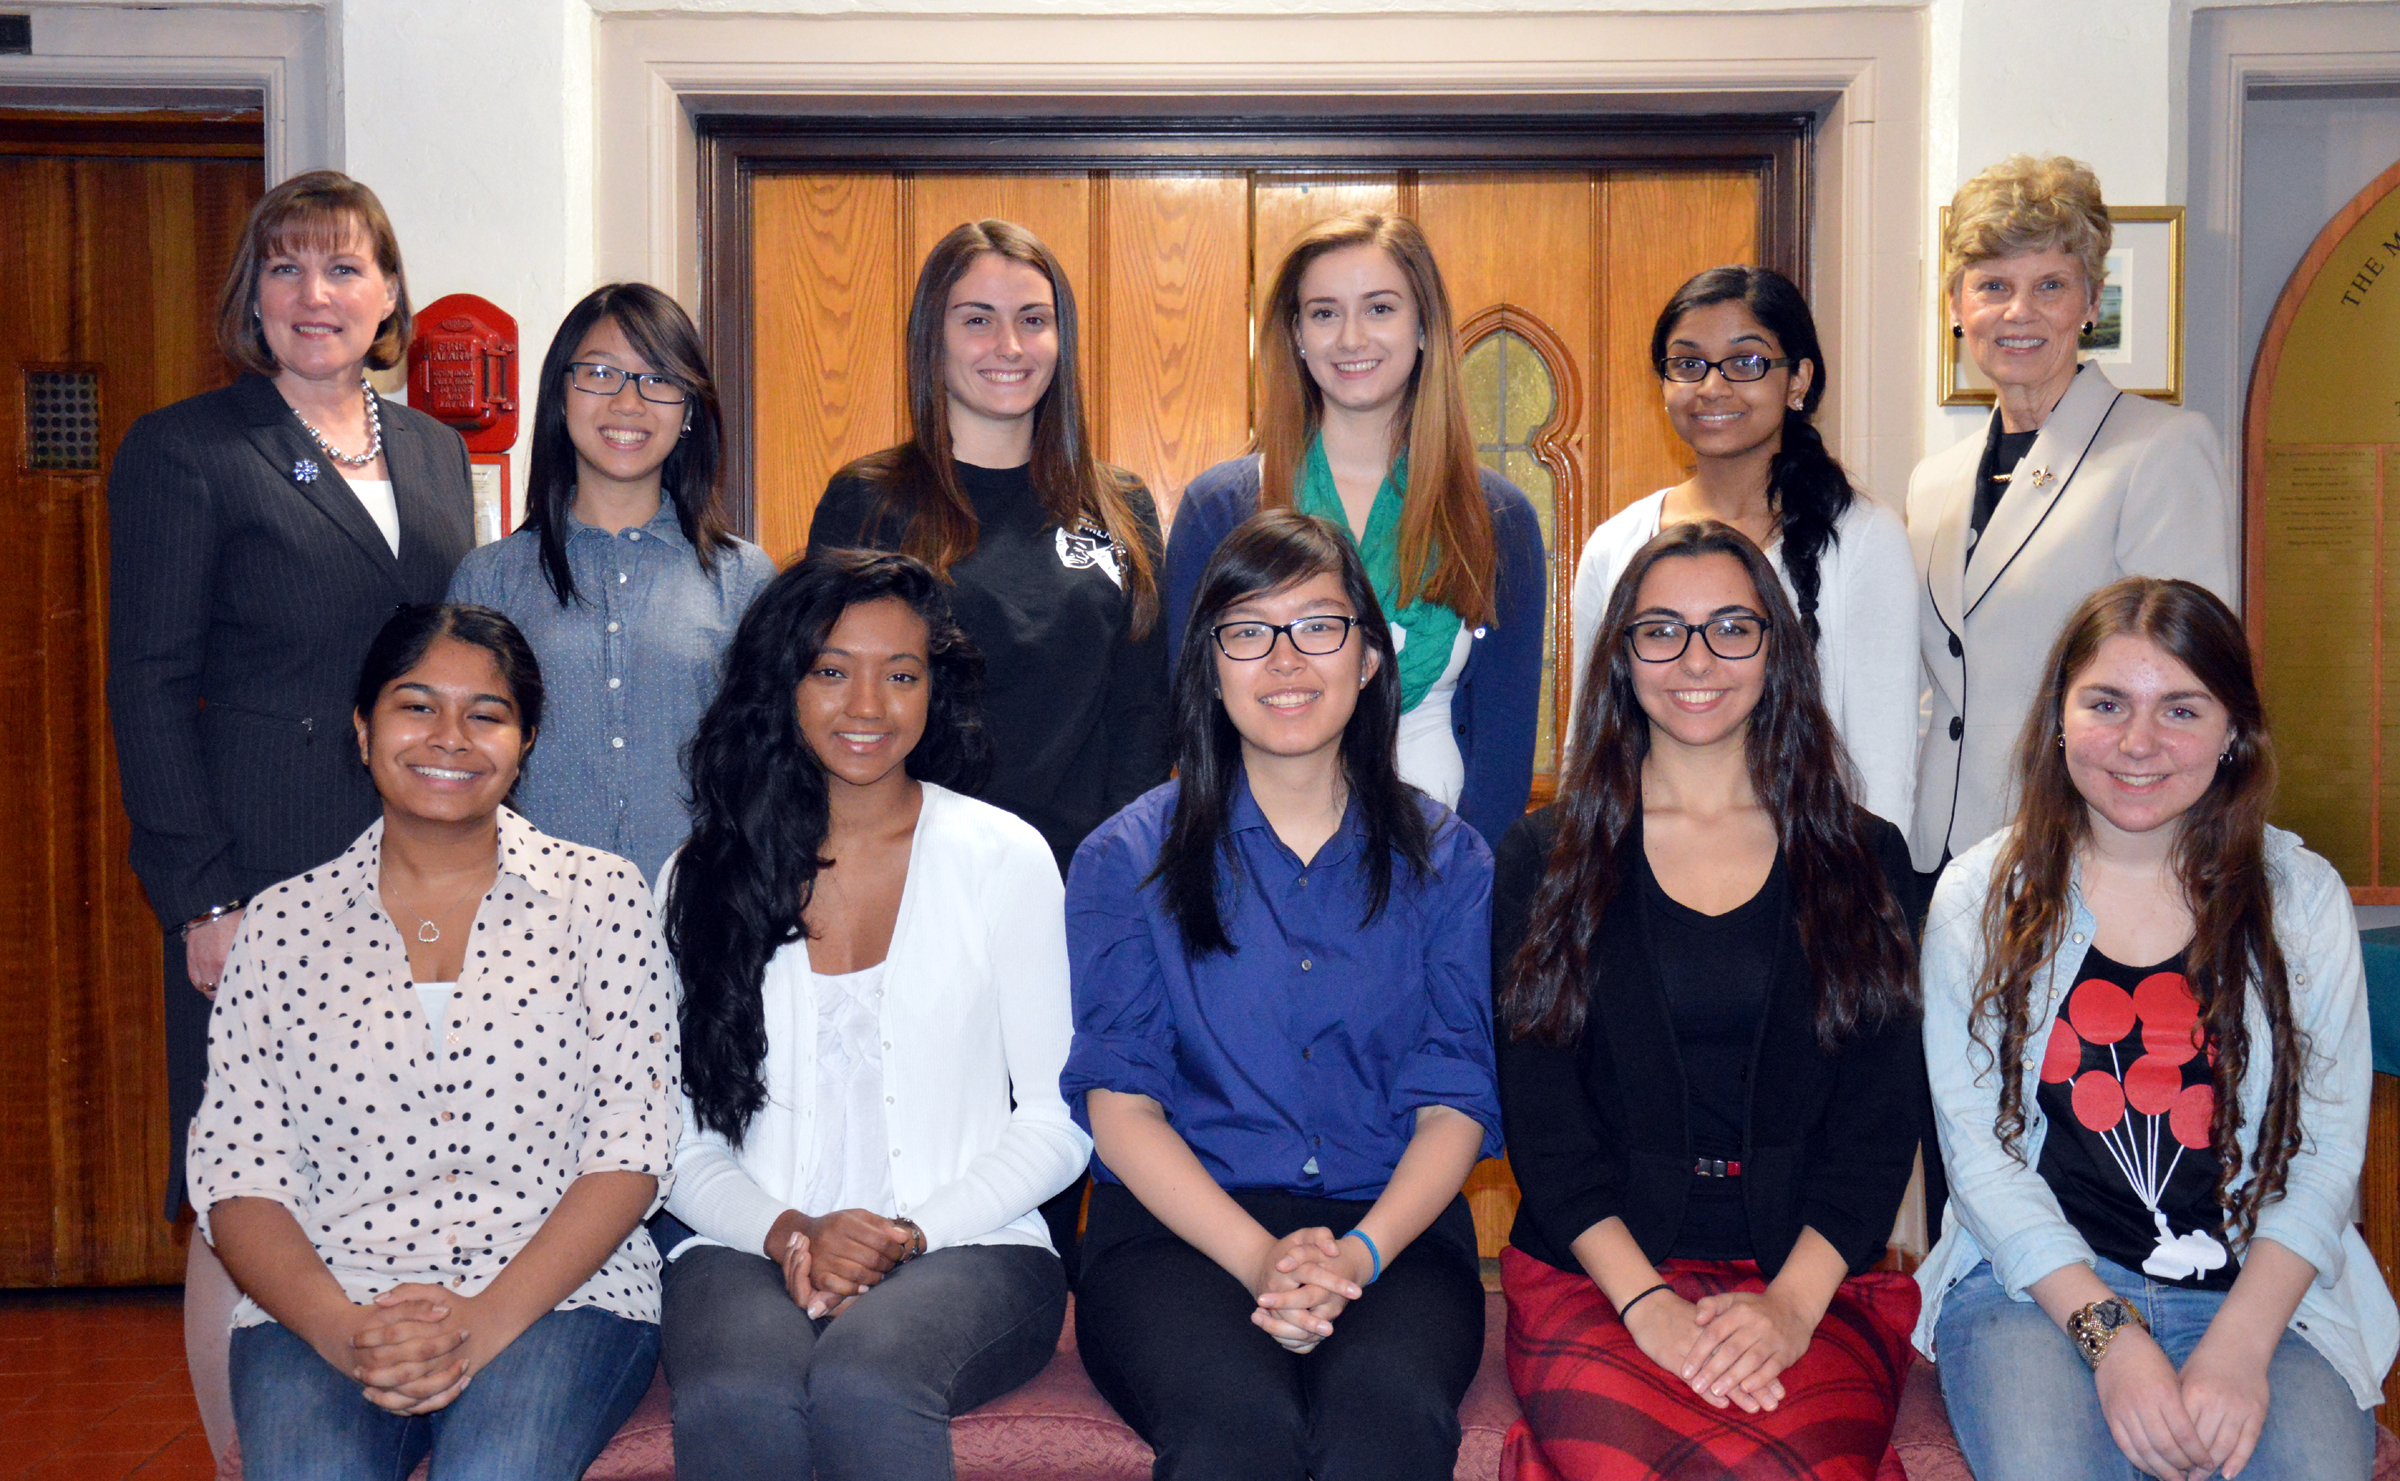 Pictured are The Mary Louis Academy seniors accepted to the prestigious program: Judith Lao, Victoria Fernandez, Claire Loredan, Christina Thomas,  Violetta Saldanha, Nicole Pereira, Jolie Chow,  Julia Canzoneri and Victoria Maxham.While at Laboure, she has gained many skills needed to become an independent and active member of her community.   Throughout her years at Laboure, Walters has volunteered as a teacher’s assistant at many different elementary schools in Brooklyn. She was also a camp counselor at a sleep-away camp that she attended.   After graduation, Herone is looking forward to working at a day care center and will be going to Job Path and the YAI Network to learn more skills needed to advance in her life and career. 